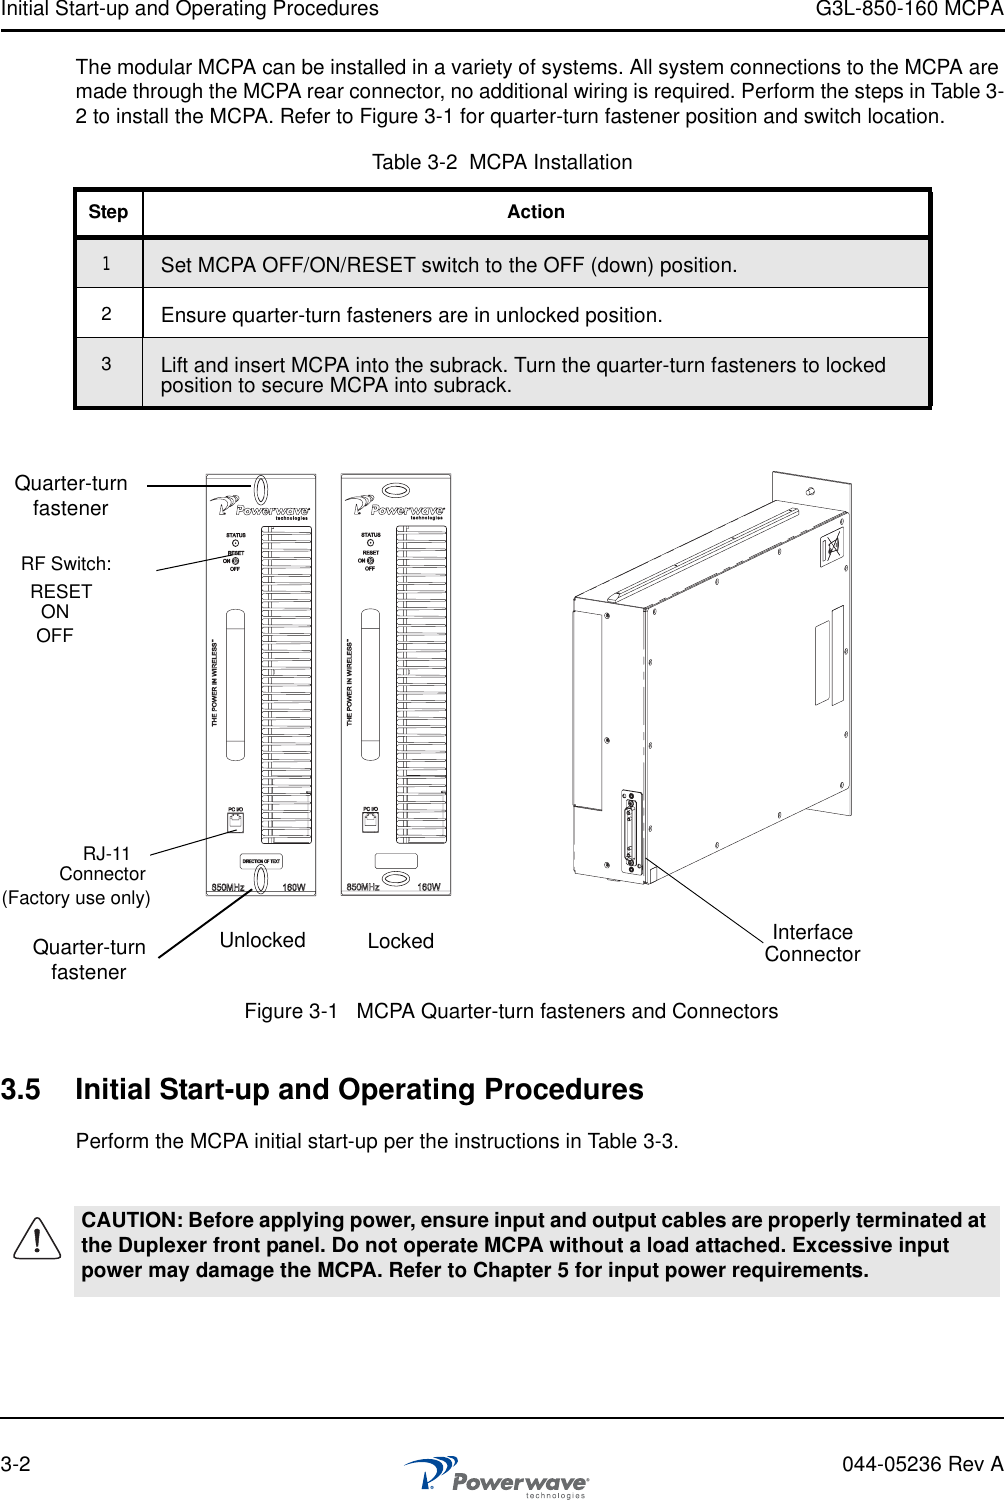 Initial Start-up and Operating Procedures G3L-850-160 MCPA3-2 044-05236 Rev AThe modular MCPA can be installed in a variety of systems. All system connections to the MCPA are made through the MCPA rear connector, no additional wiring is required. Perform the steps in Table 3-2 to install the MCPA. Refer to Figure 3-1 for quarter-turn fastener position and switch location.3.5 Initial Start-up and Operating ProceduresPerform the MCPA initial start-up per the instructions in Table 3-3.Table 3-2  MCPA InstallationStep Action1Set MCPA OFF/ON/RESET switch to the OFF (down) position.2Ensure quarter-turn fasteners are in unlocked position.3Lift and insert MCPA into the subrack. Turn the quarter-turn fasteners to locked position to secure MCPA into subrack.CAUTION: Before applying power, ensure input and output cables are properly terminated at the Duplexer front panel. Do not operate MCPA without a load attached. Excessive input power may damage the MCPA. Refer to Chapter 5 for input power requirements.Figure 3-1   MCPA Quarter-turn fasteners and ConnectorsUnlocked LockedRF Switch:RJ-11Connector(Factory use only)Quarter-turnfastenerRESETONOFFQuarter-turnfastenerInterfaceConnector